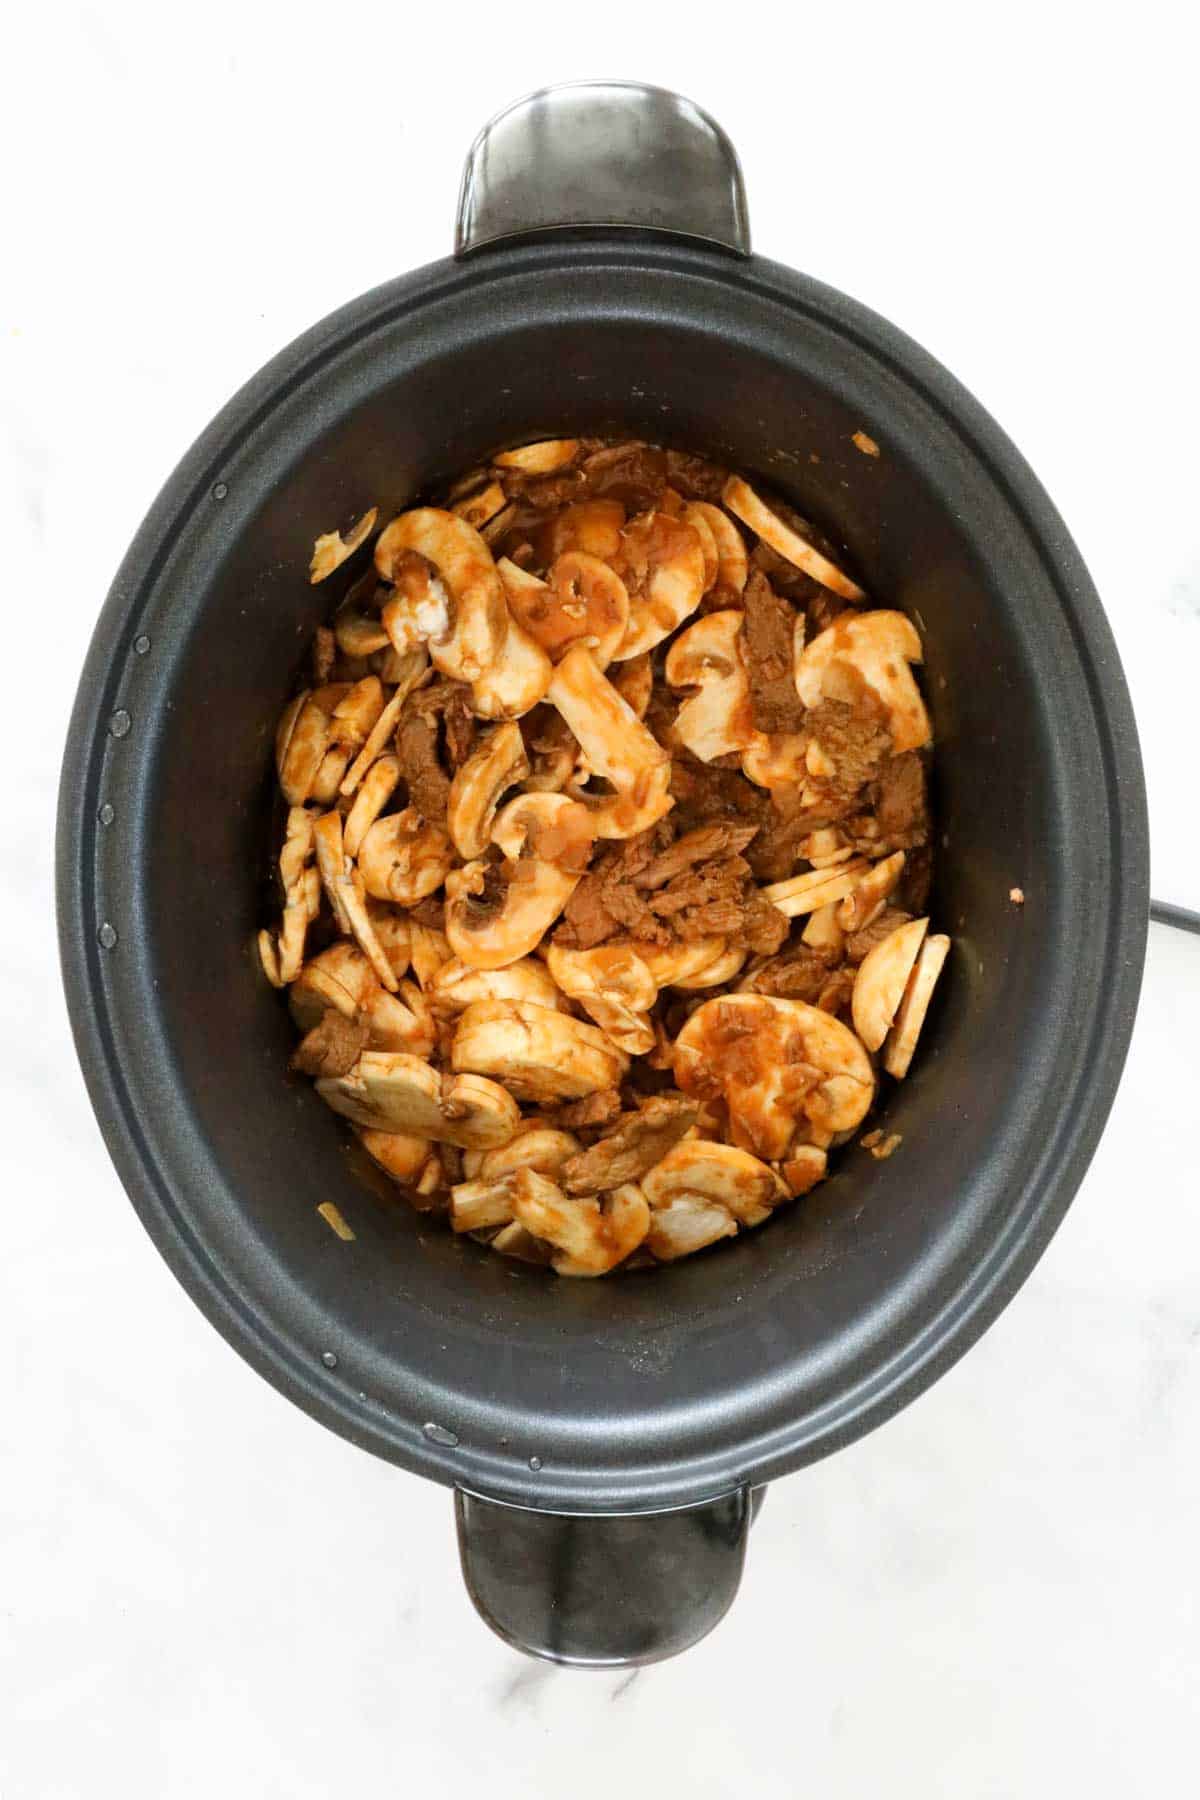 Sliced mushrooms added to slow cooker.